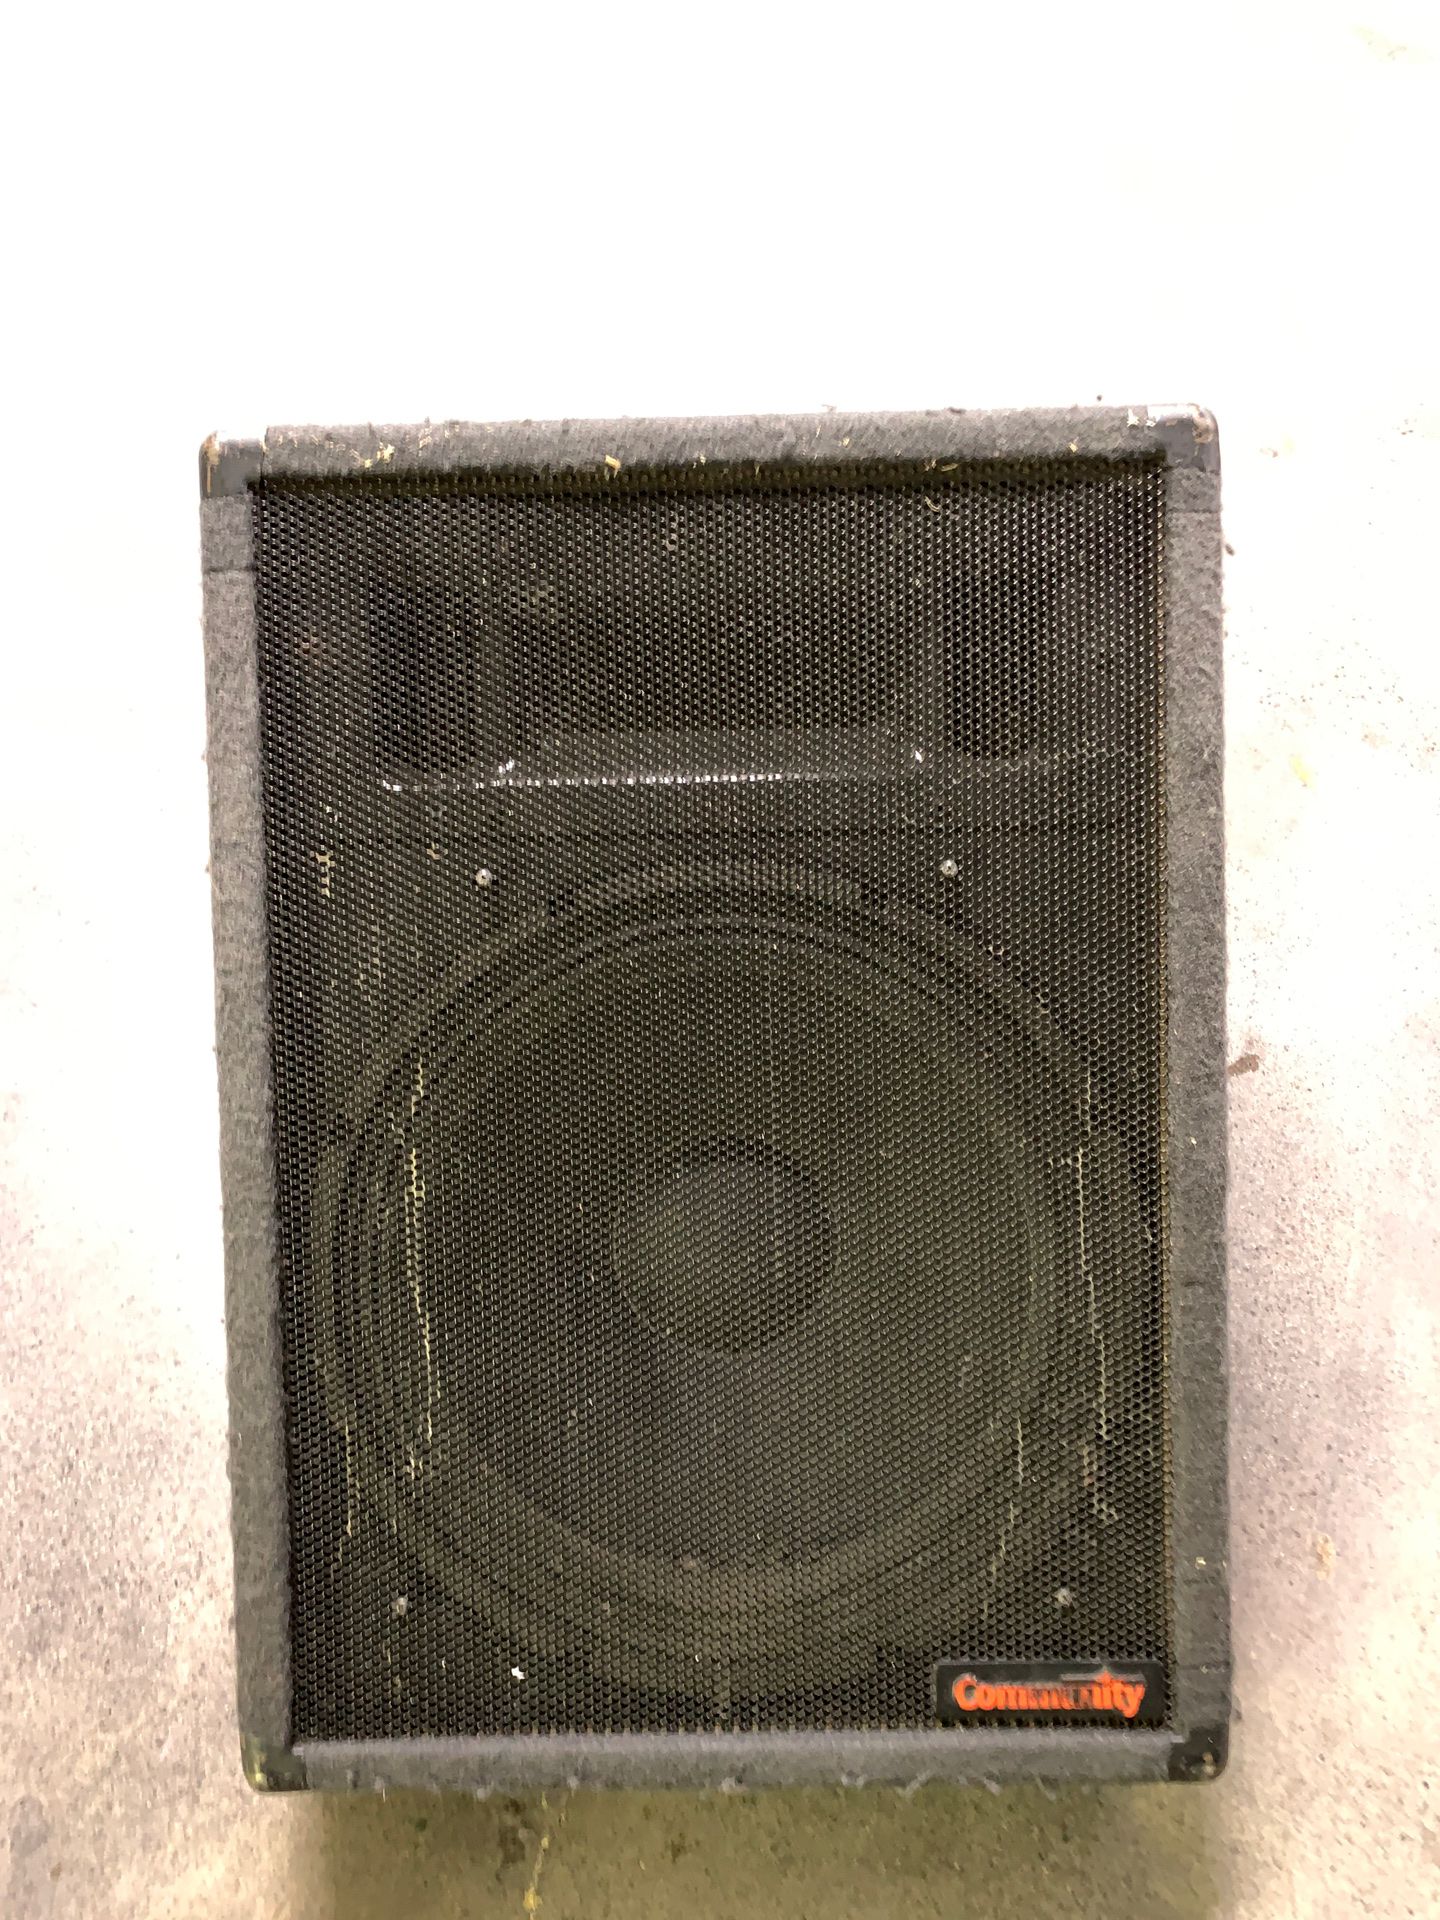 Community Wedge Stage Monitor CSX3800 Two Way Speakers Pro Audio